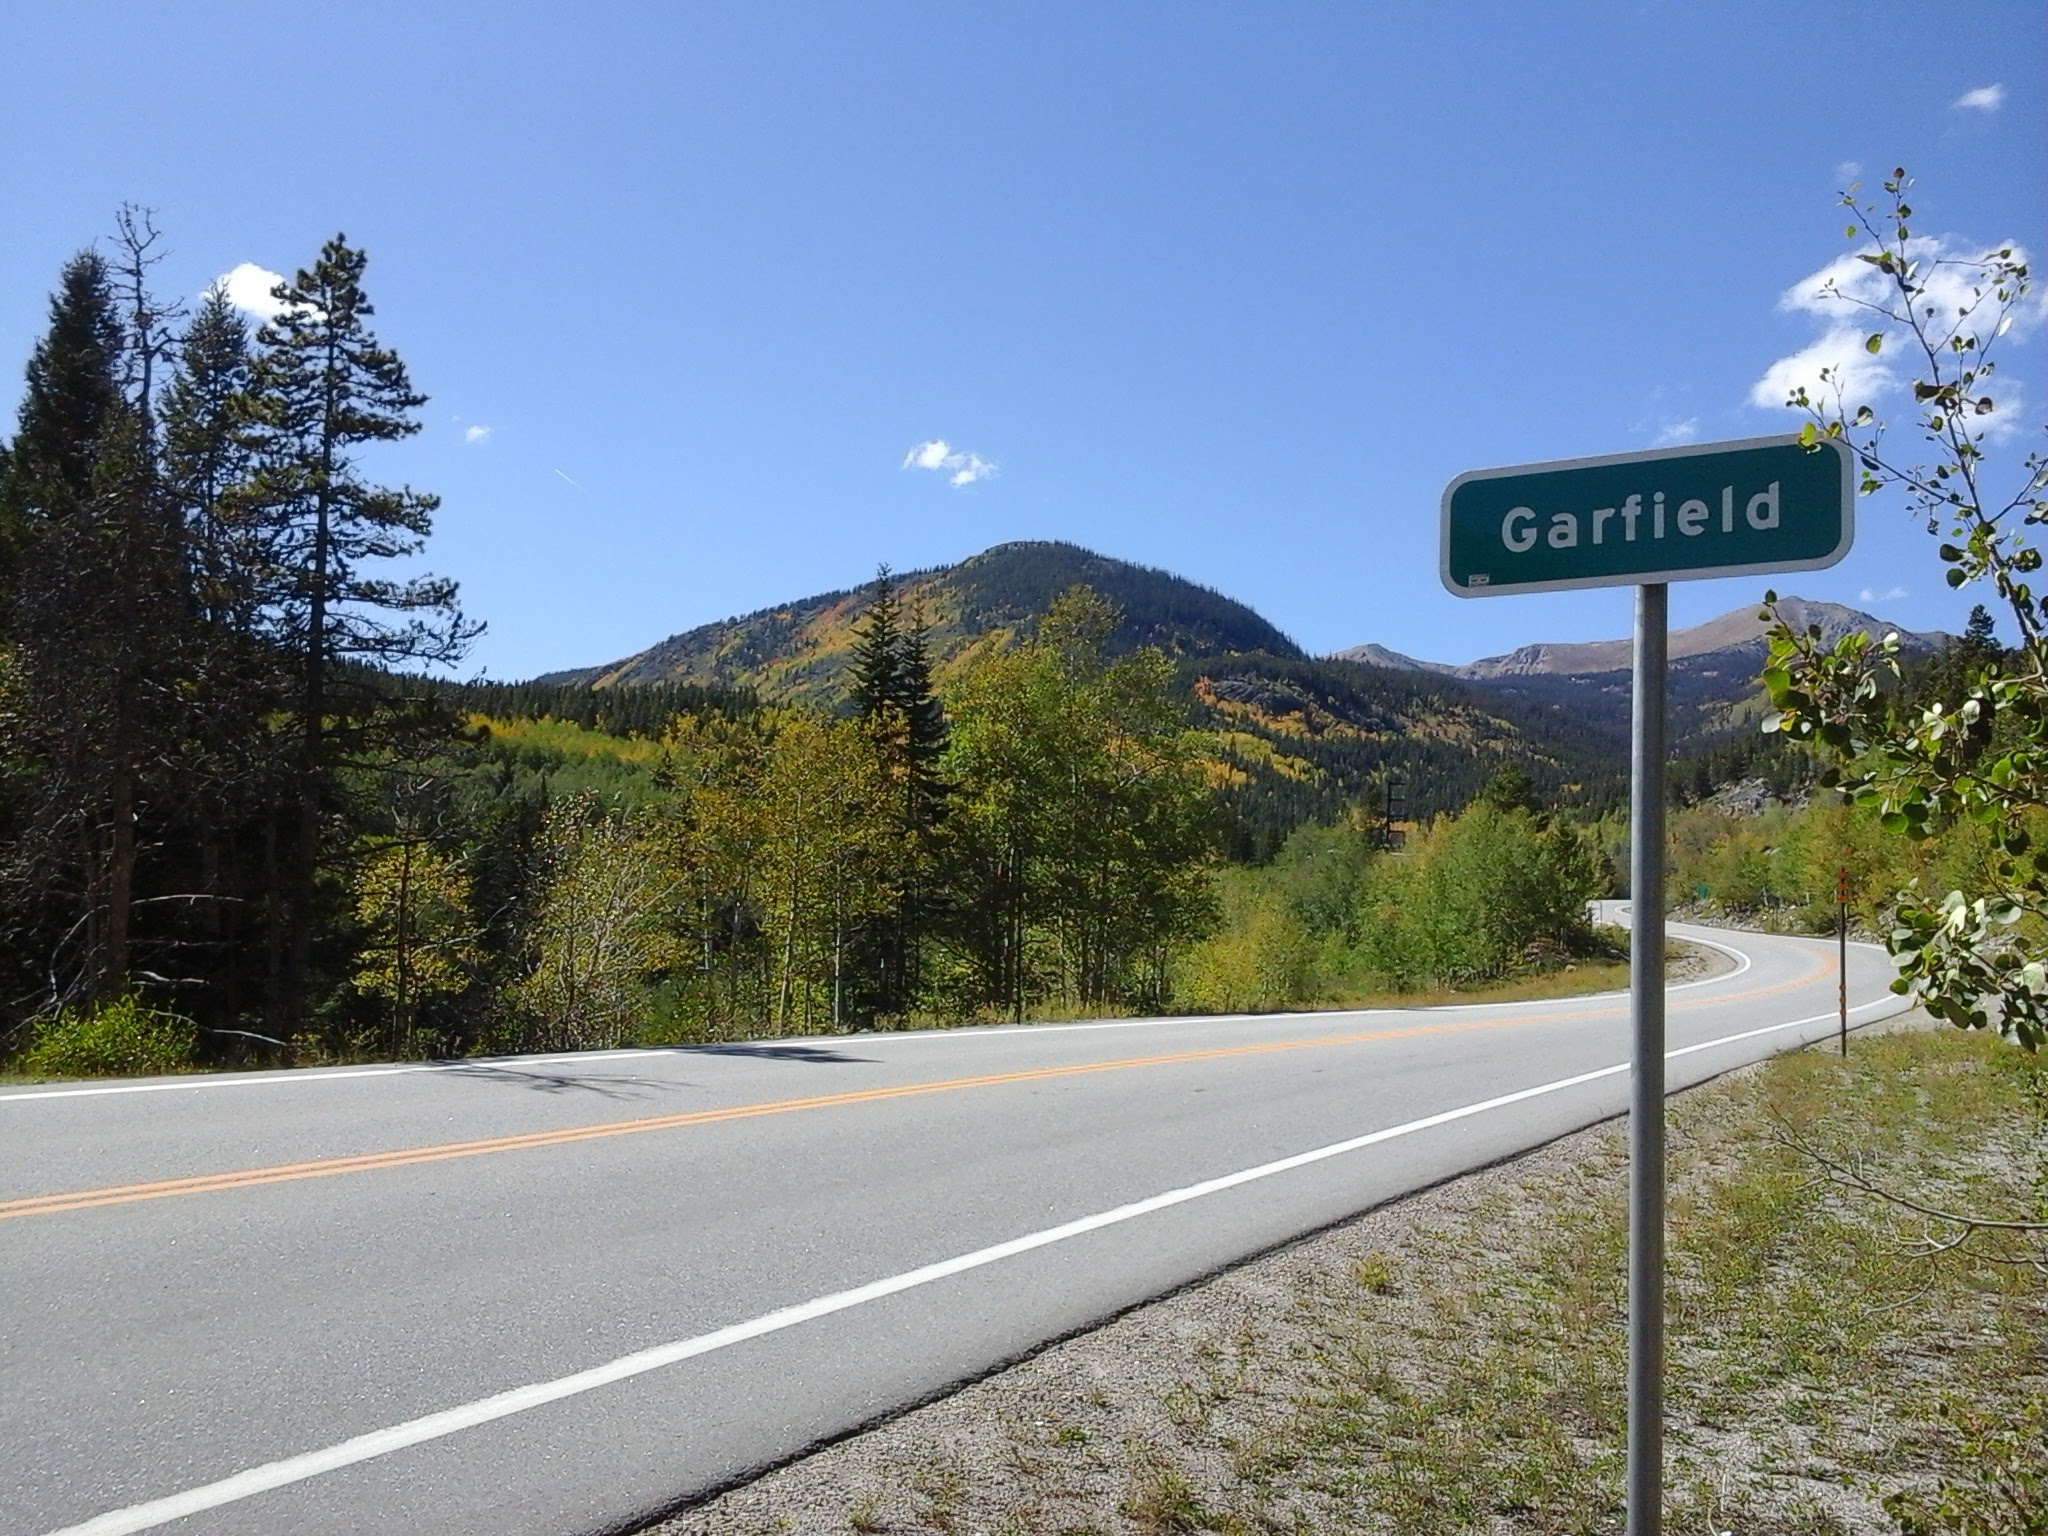 View from the Garfield highway sign with the fall colors along the pass.